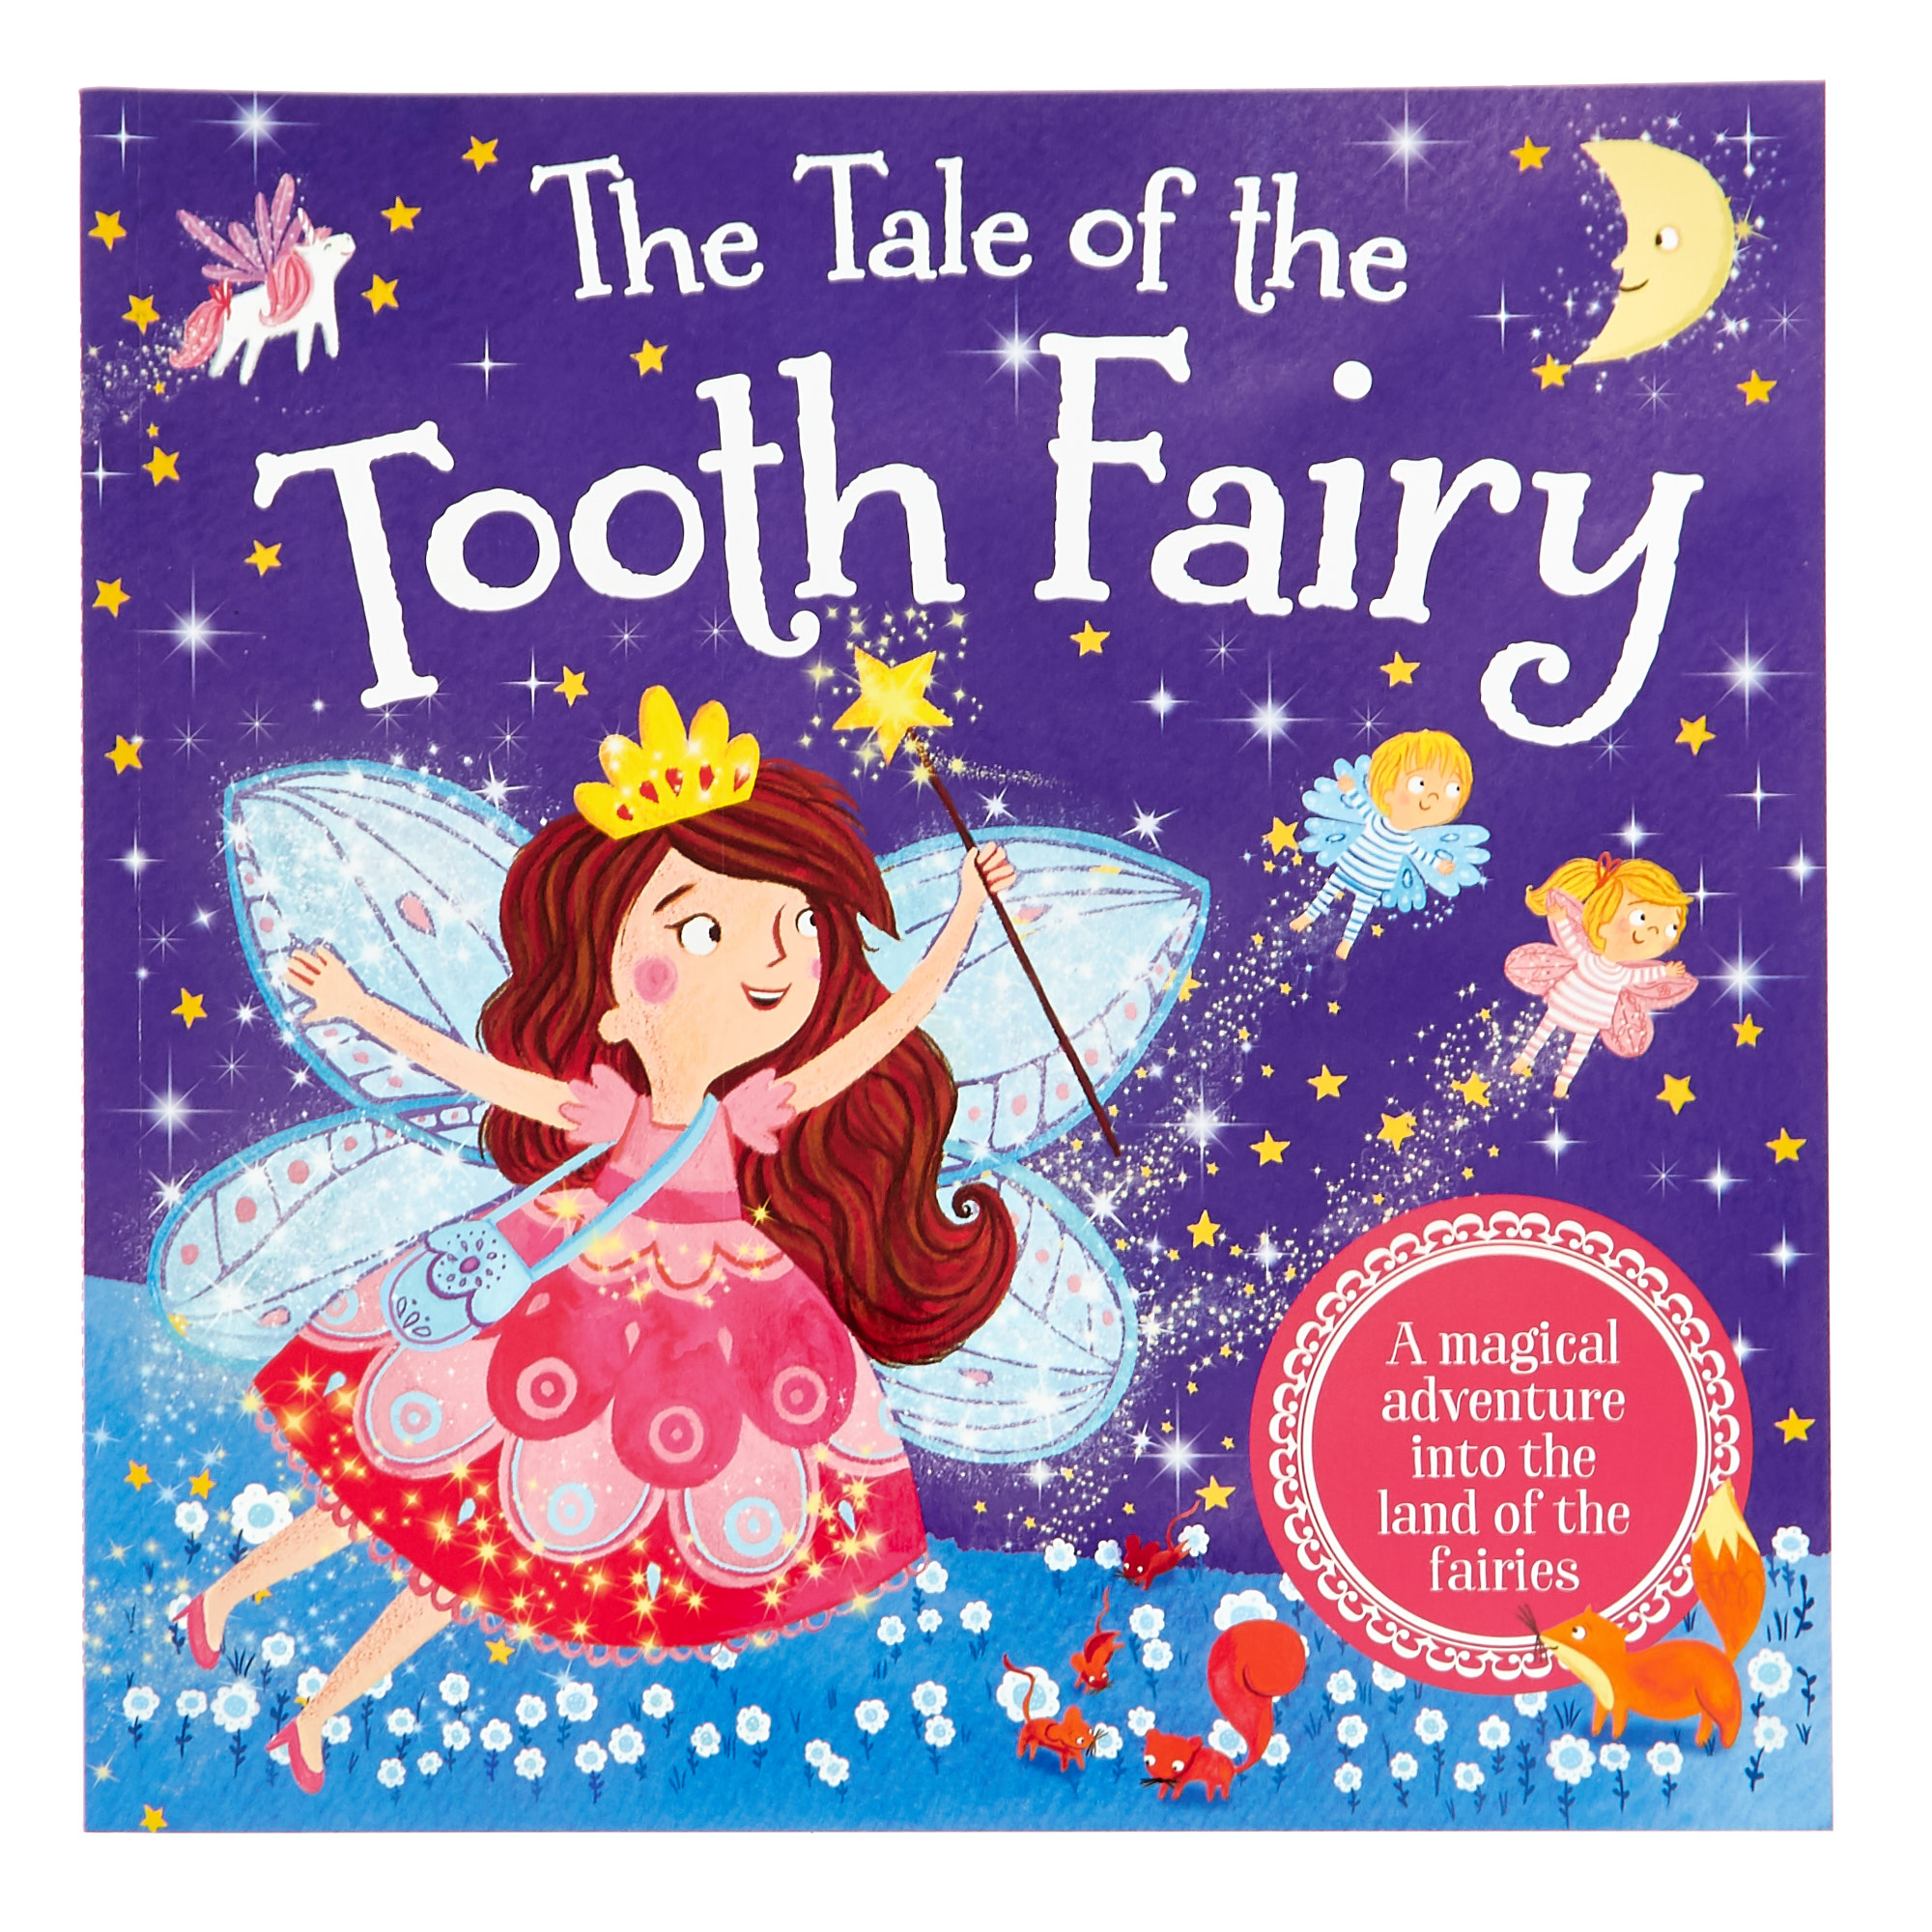 The Tale of the Tooth Fairy Book